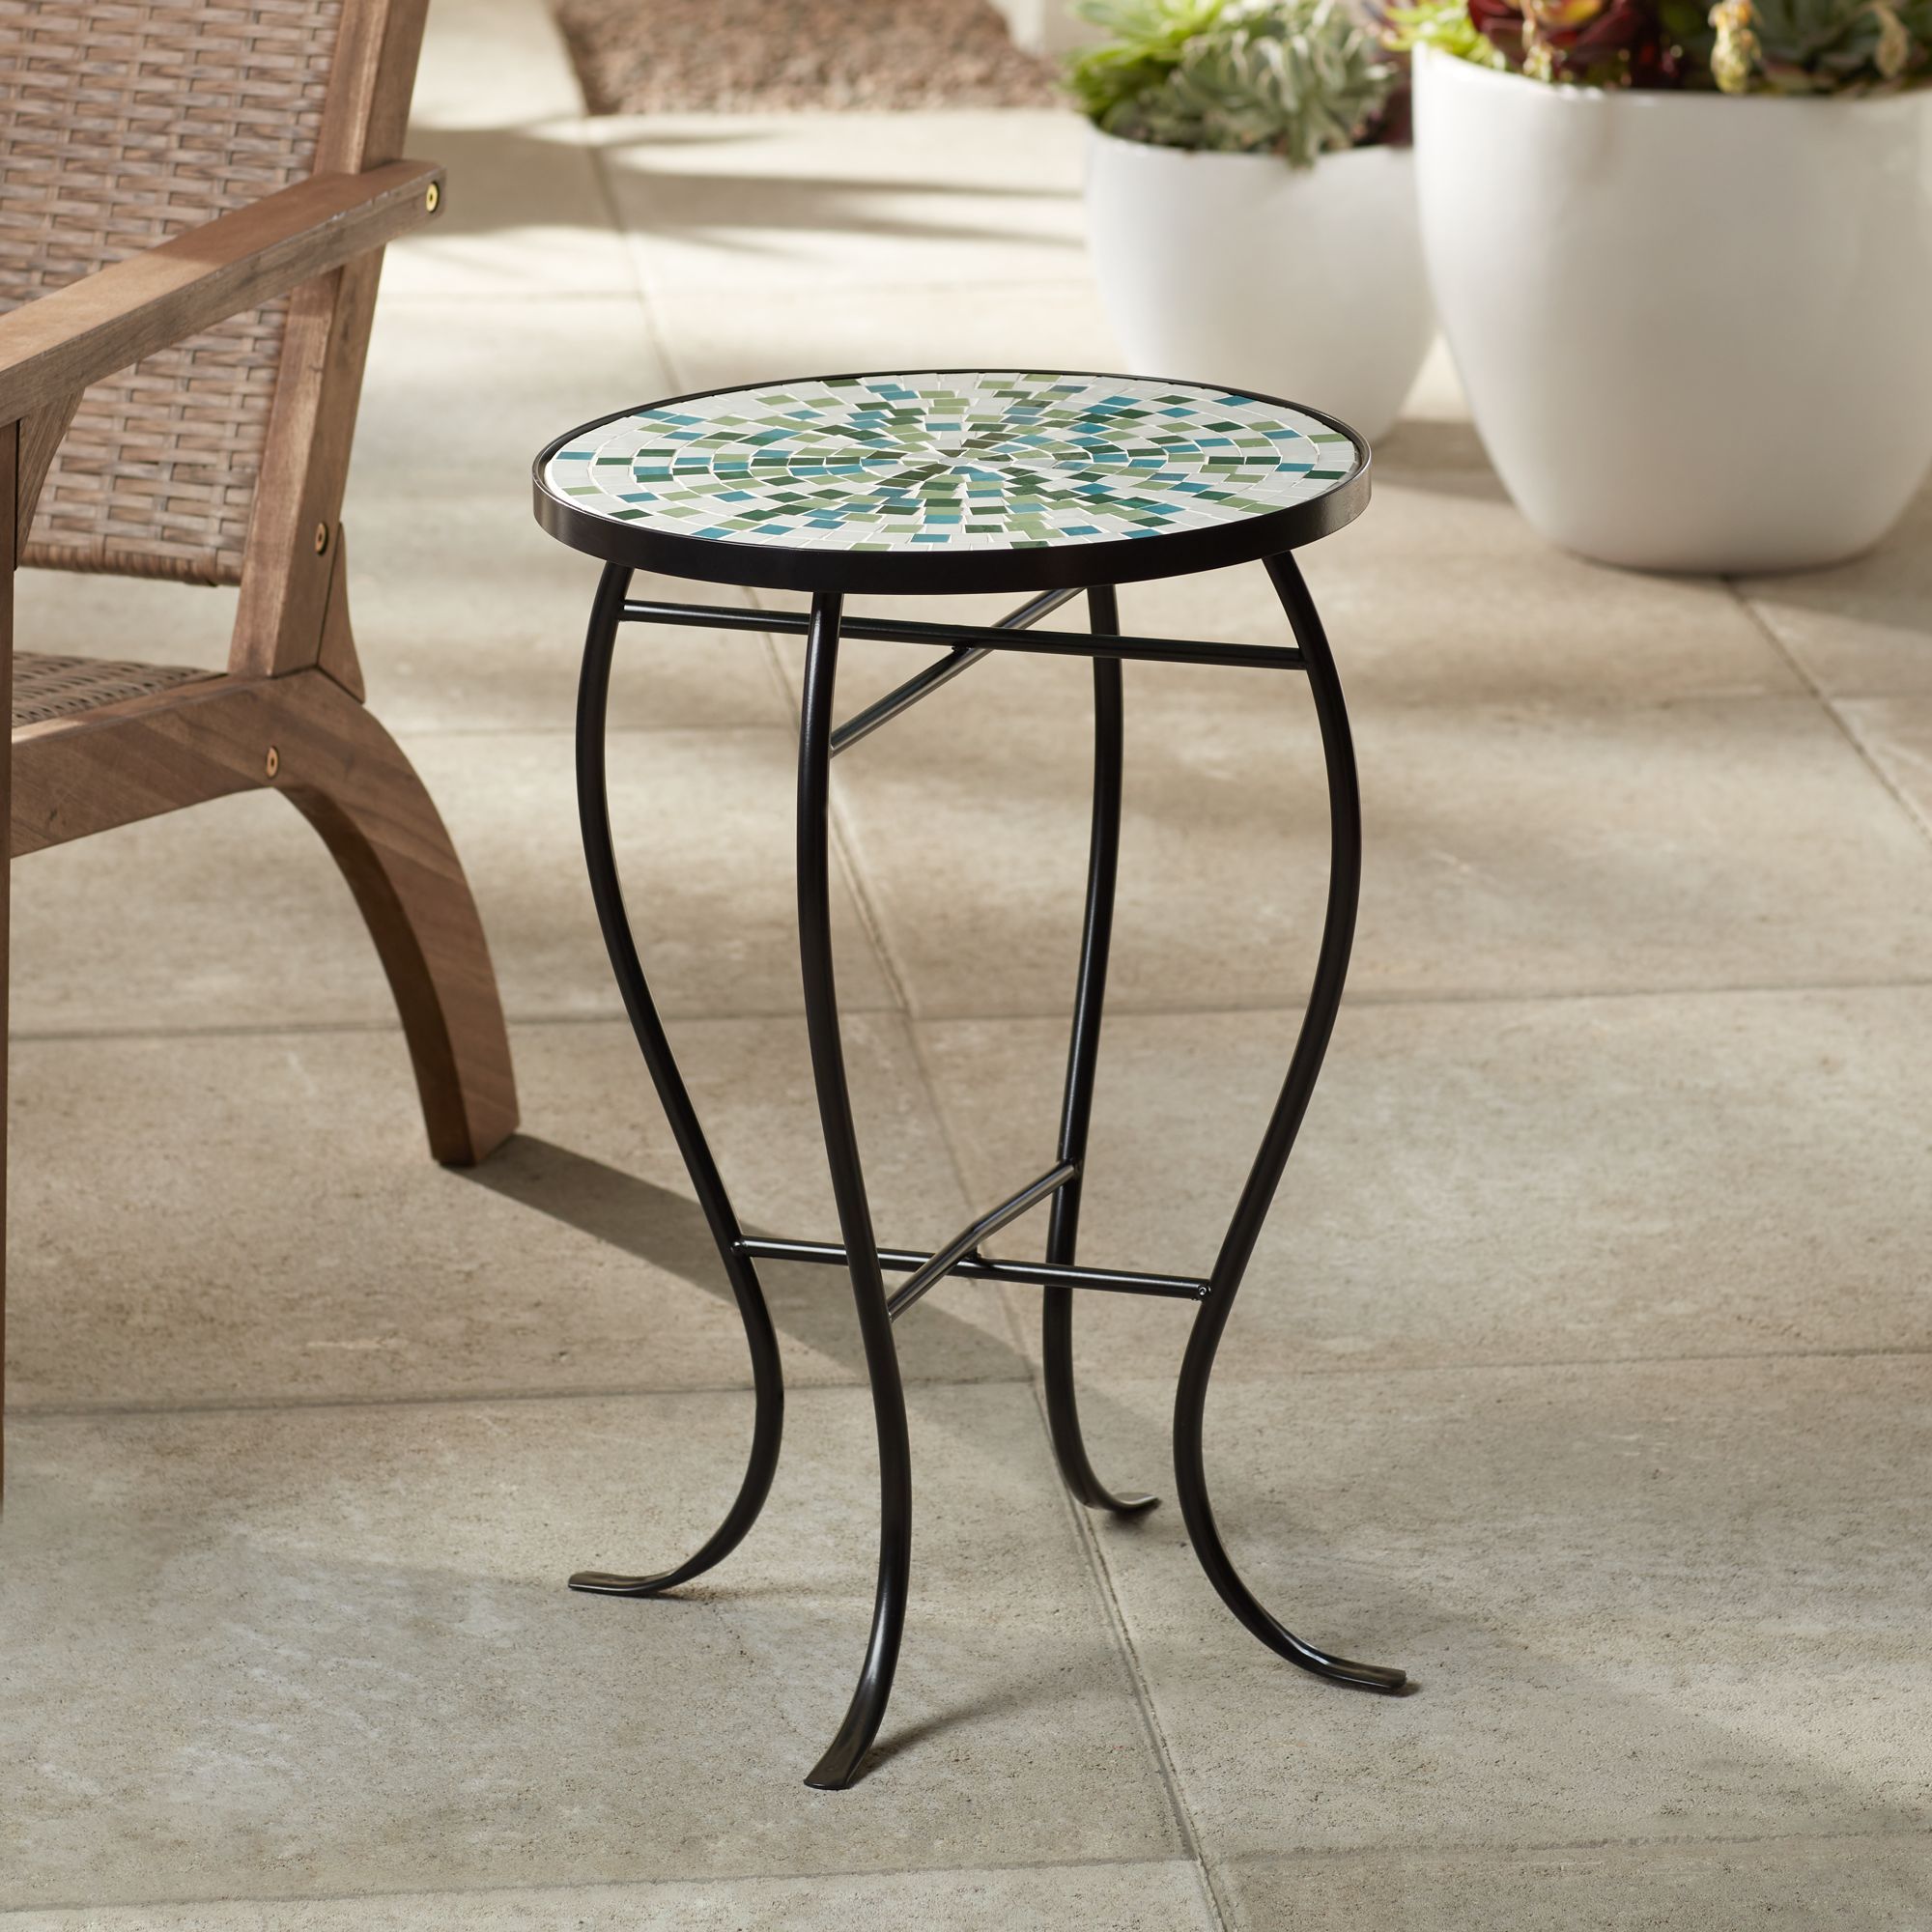 Blue Mosaic Outdoor Coffee Table : Amazon Com Teal Island Designs Blue Intended For Ocean Mosaic Outdoor Accent Tables (View 5 of 15)